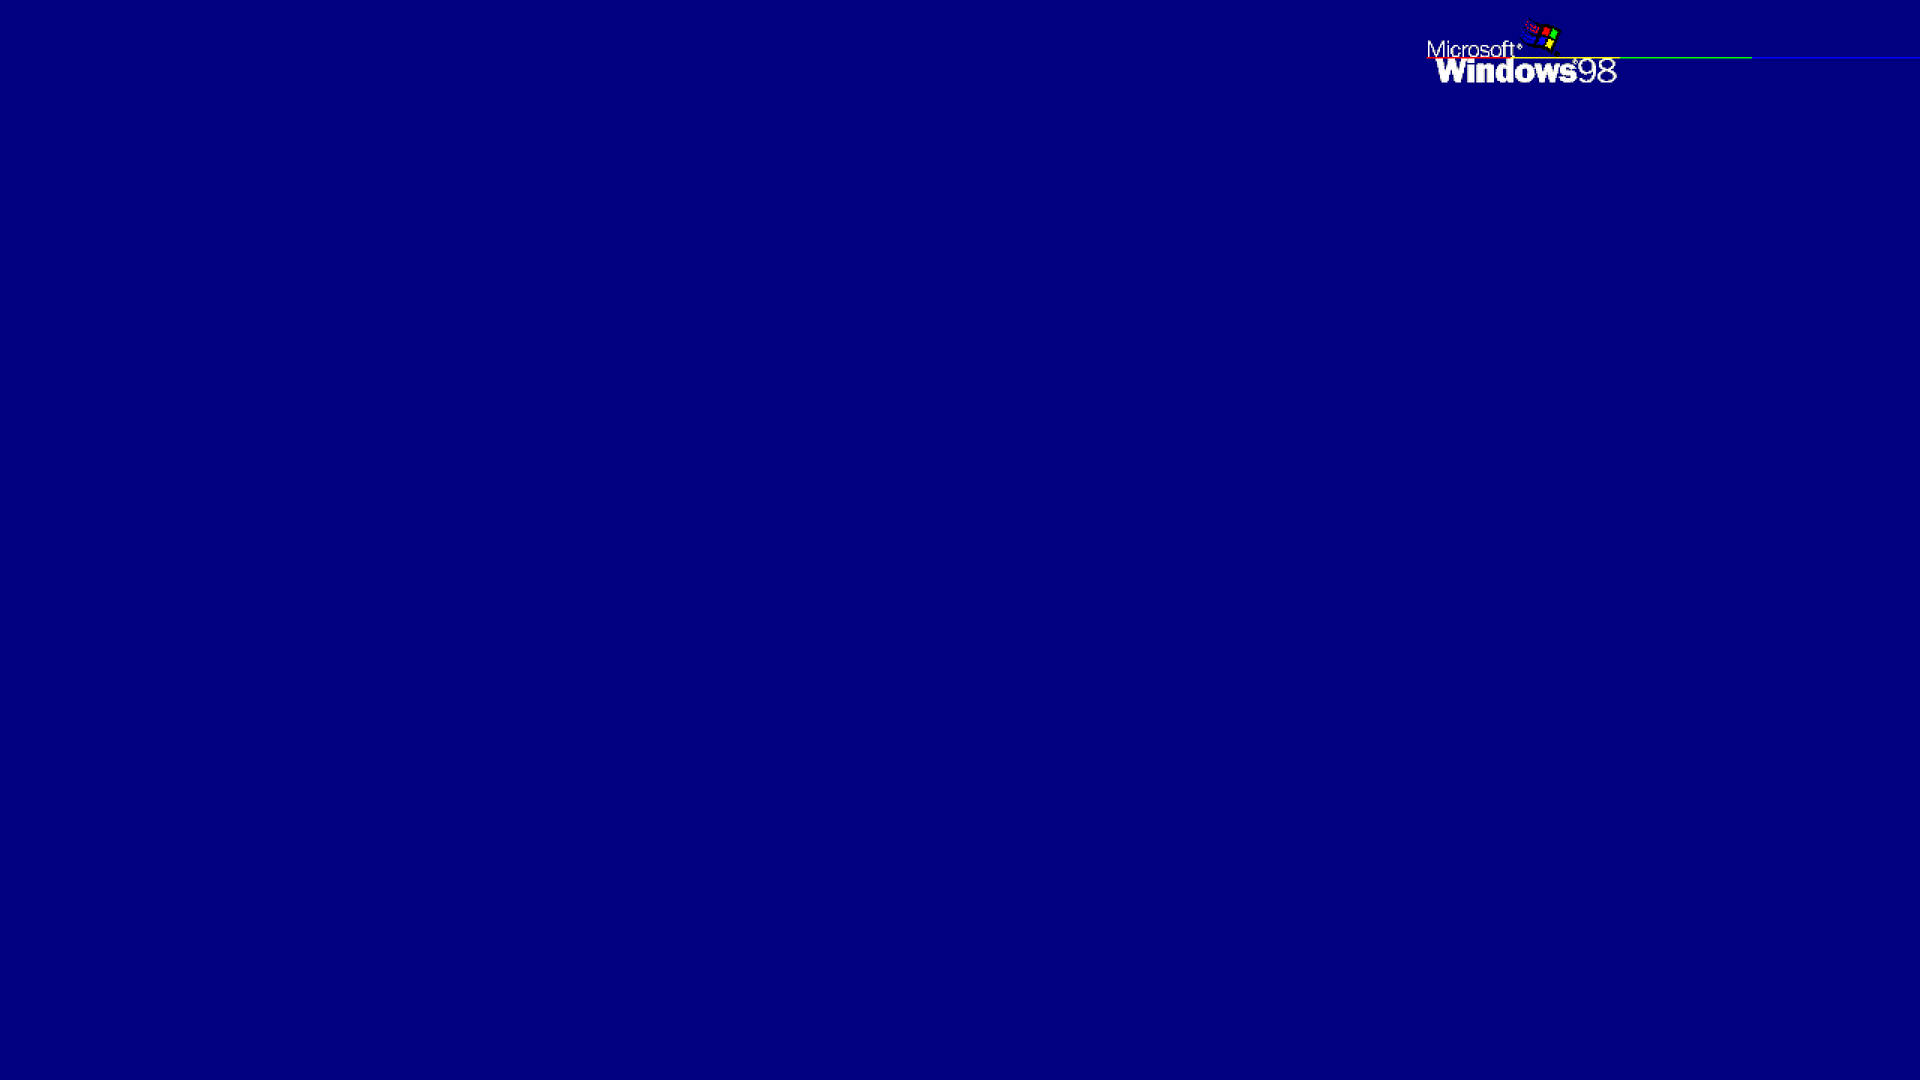 Windows 98 - A Nearly 20 Year Old Microsoft OS Wallpaper